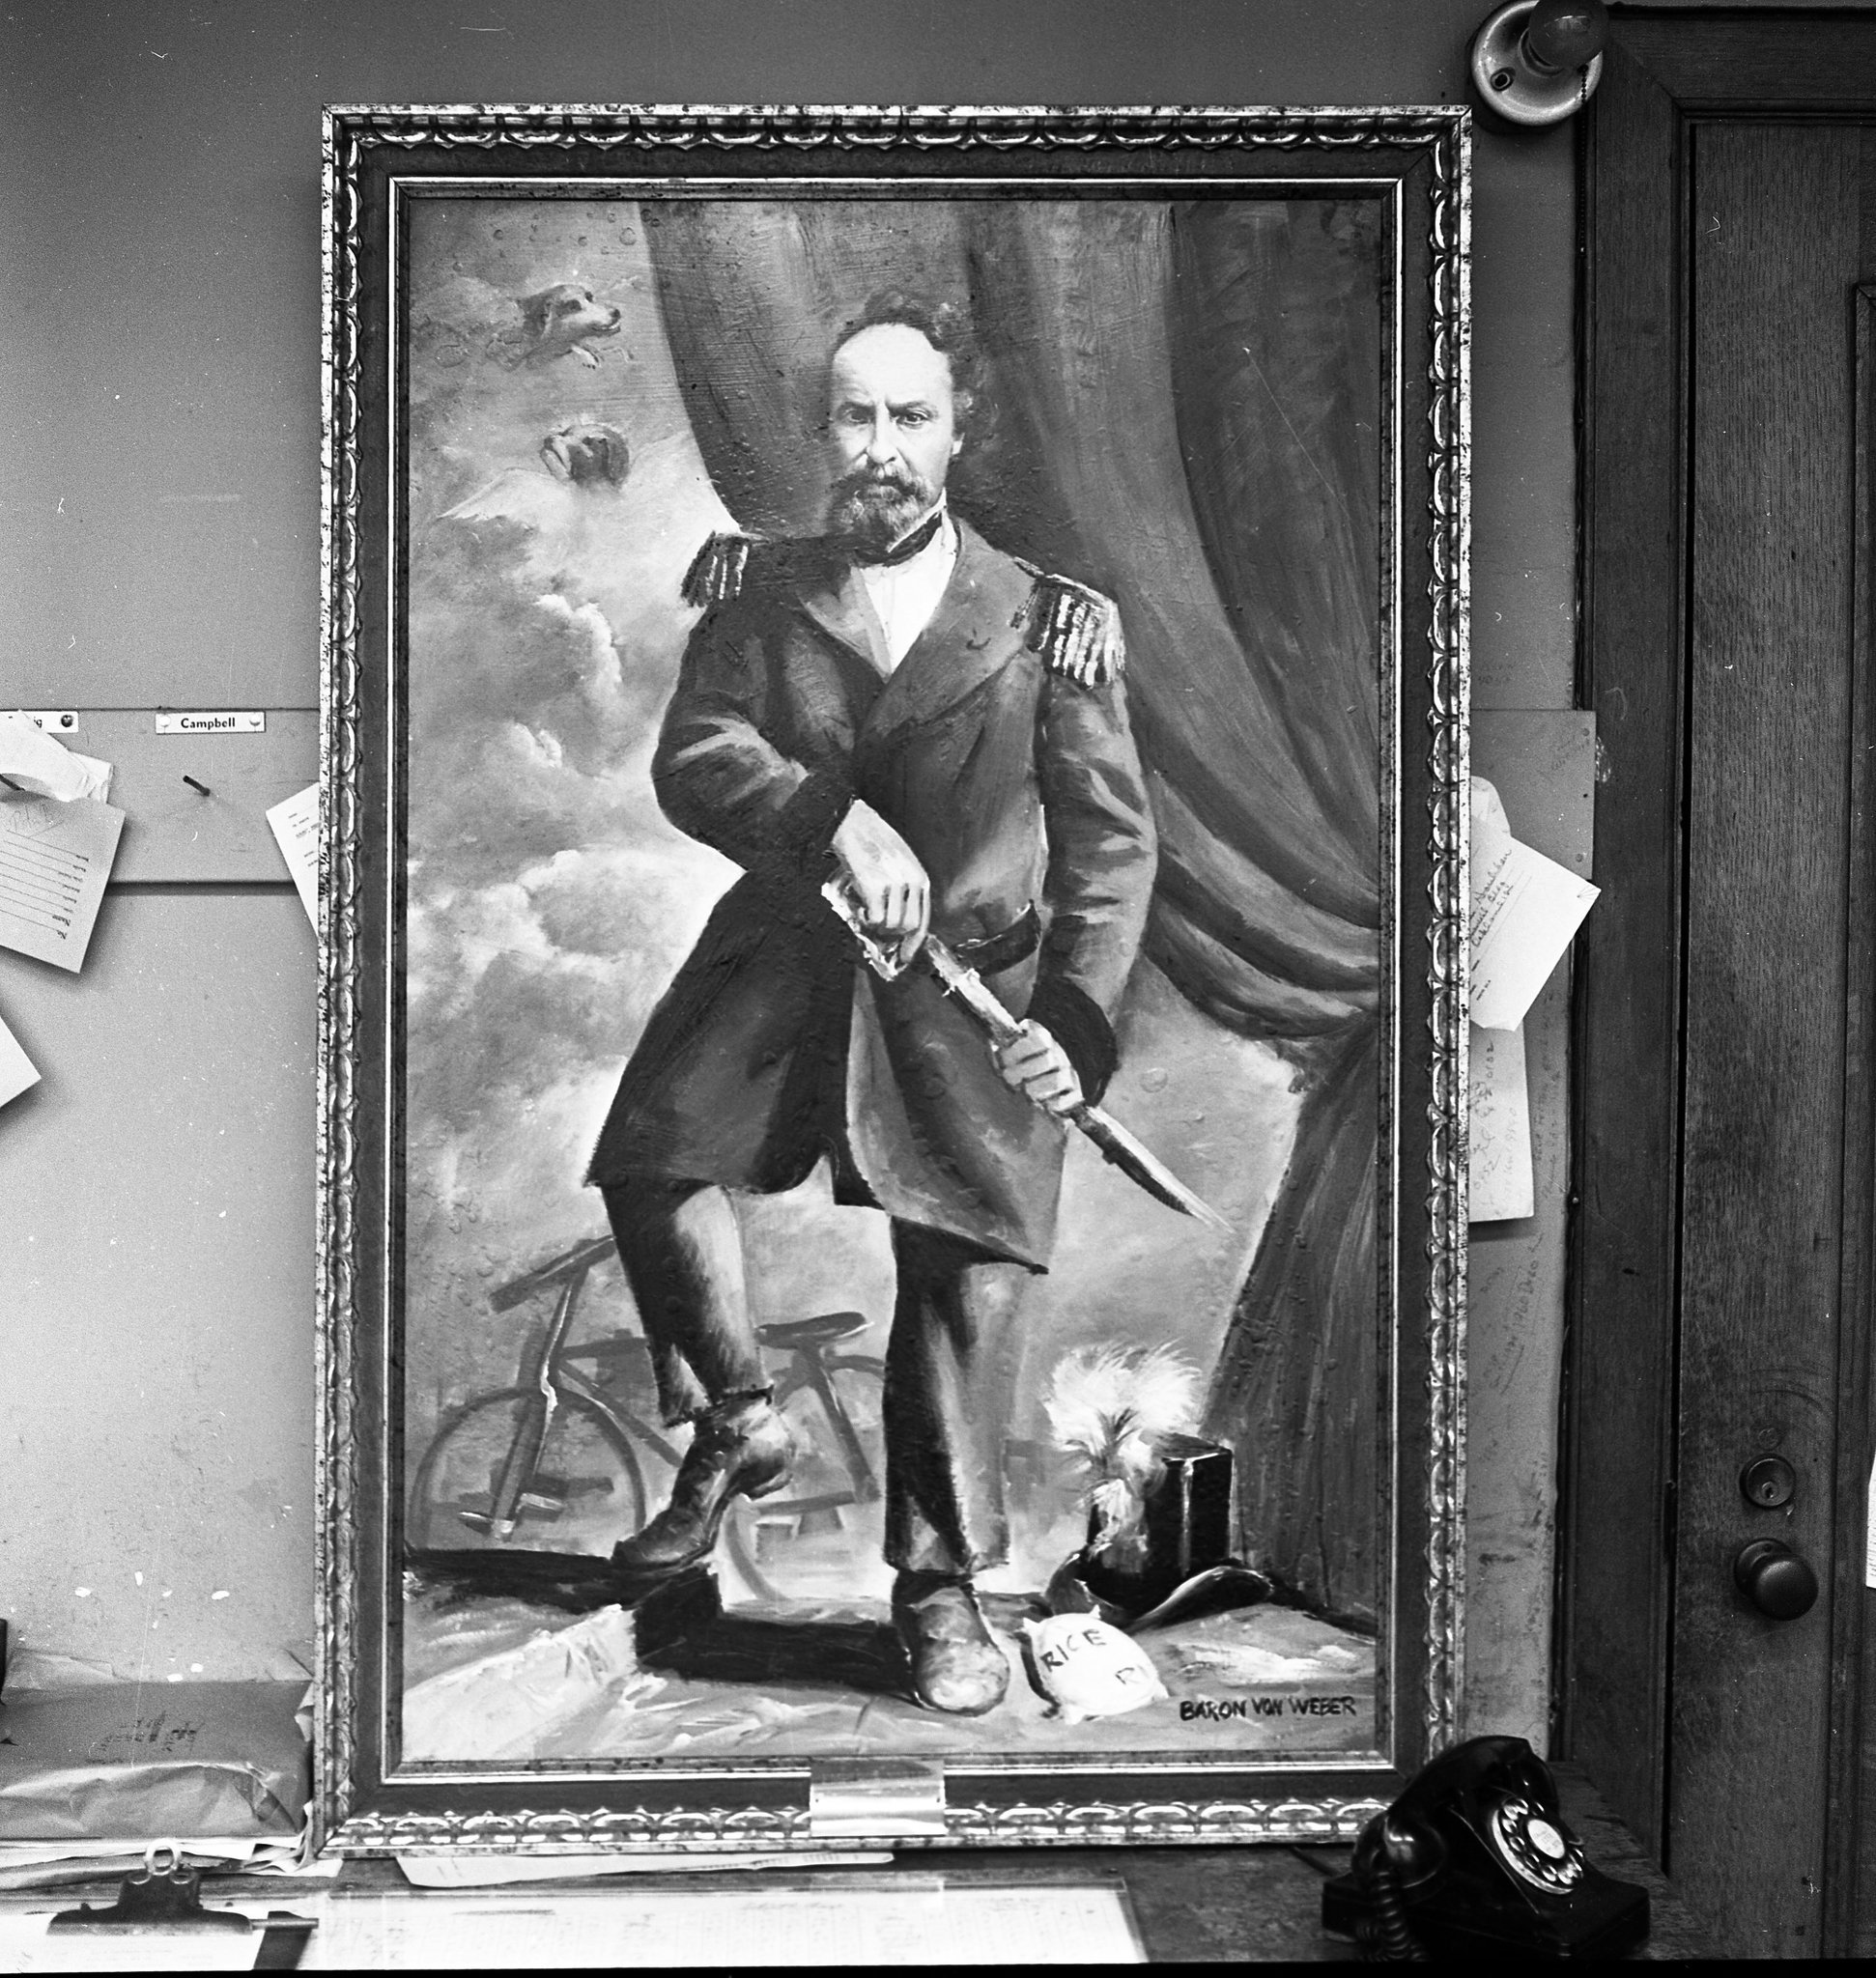   Emperor Norton, 1961, by William Hamilton Maximillian Weber (1920–1996).  Weber did this painting for the  San Francisco Chronicle  while he was “director of special arts projects” for the paper. For more, see the Trust’s February 2019 article  her